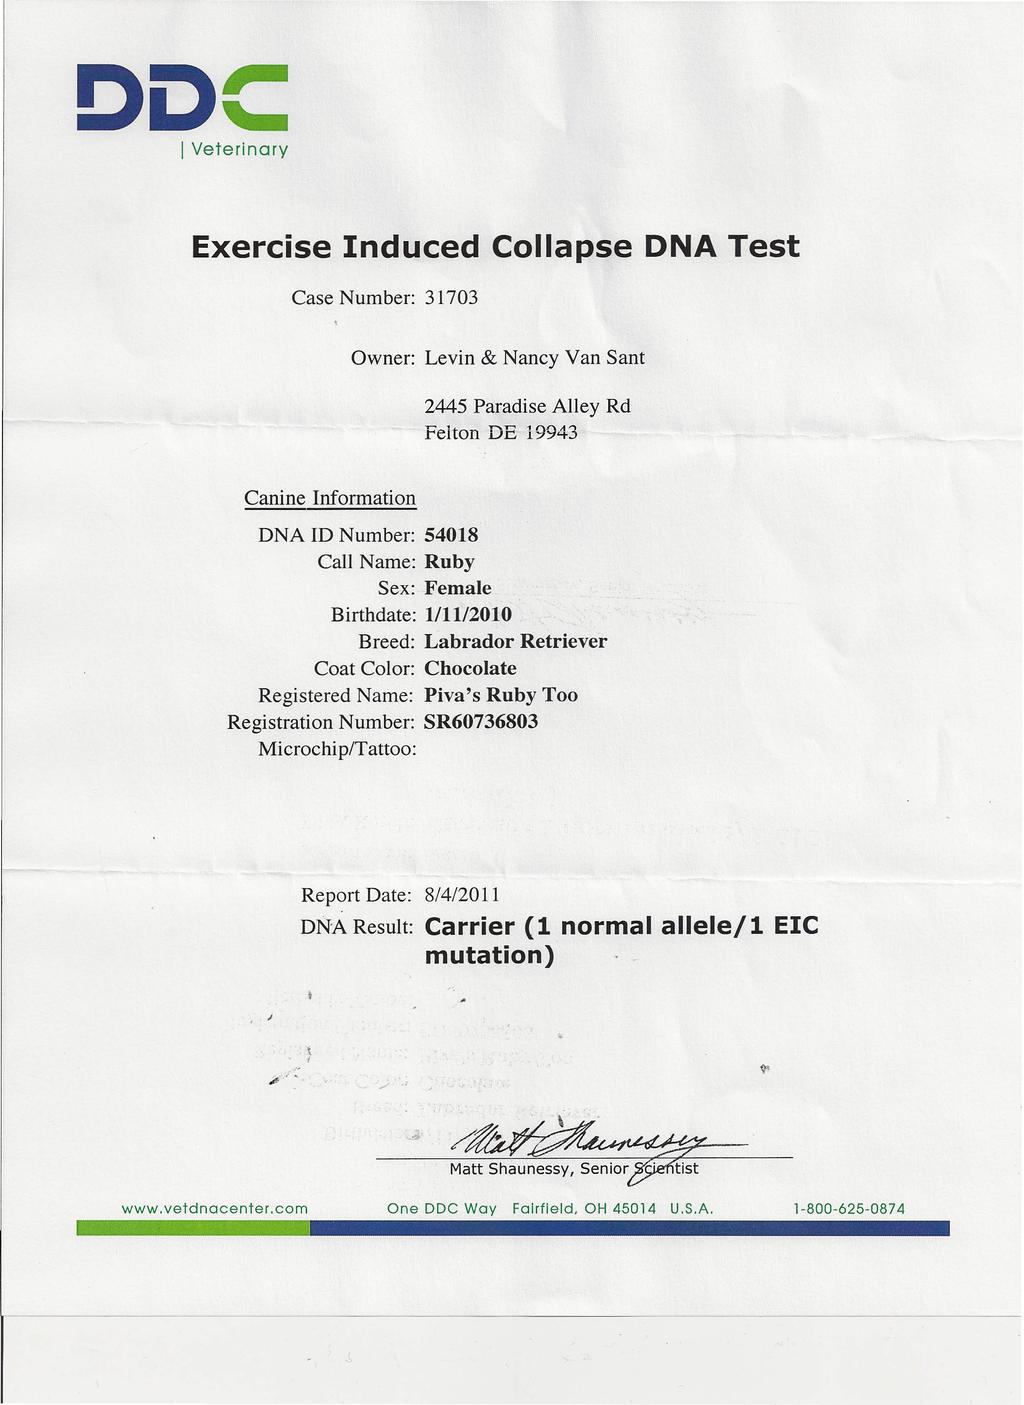 DOC I Veterinary Exercise Induced Collapse DNA Test Case Number: 31703 Owner: Levin & Nancy Van Sant 2445 Paradise Alley Rd Feiton DE 19943 Canine Information DNA ID Number: 54018 Call Name: Ruby